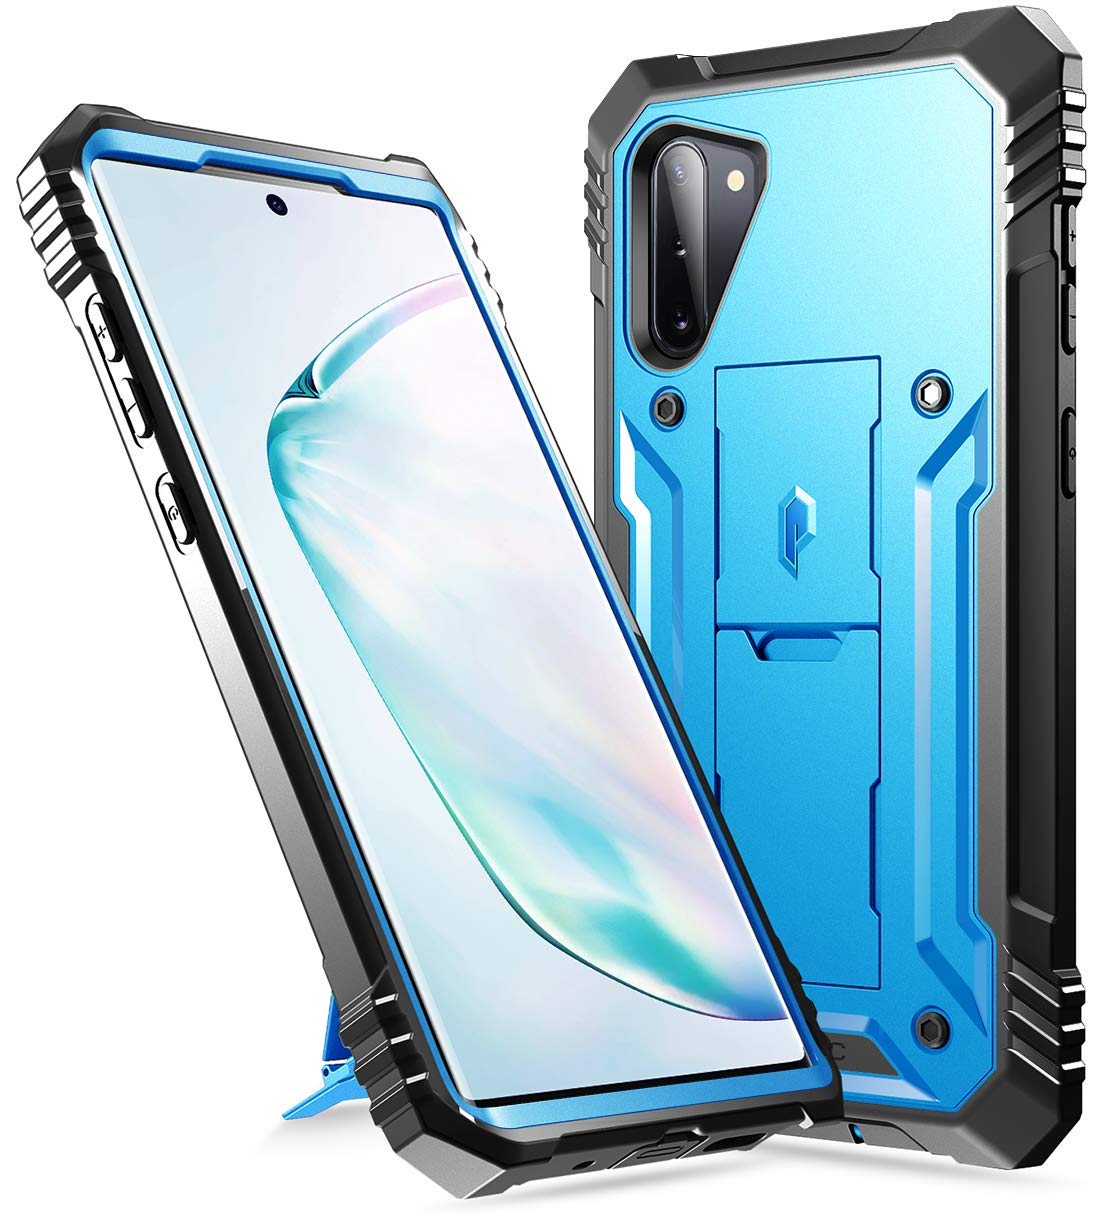 Poetic Galaxy Note 10 Rugged Case with Kickstand, Heavy Duty Military Grade Full Body Cover, Without Built-in-Screen Protector, Revolution Series, for Samsung Galaxy Note 10 (2019), Blue - image 1 of 7